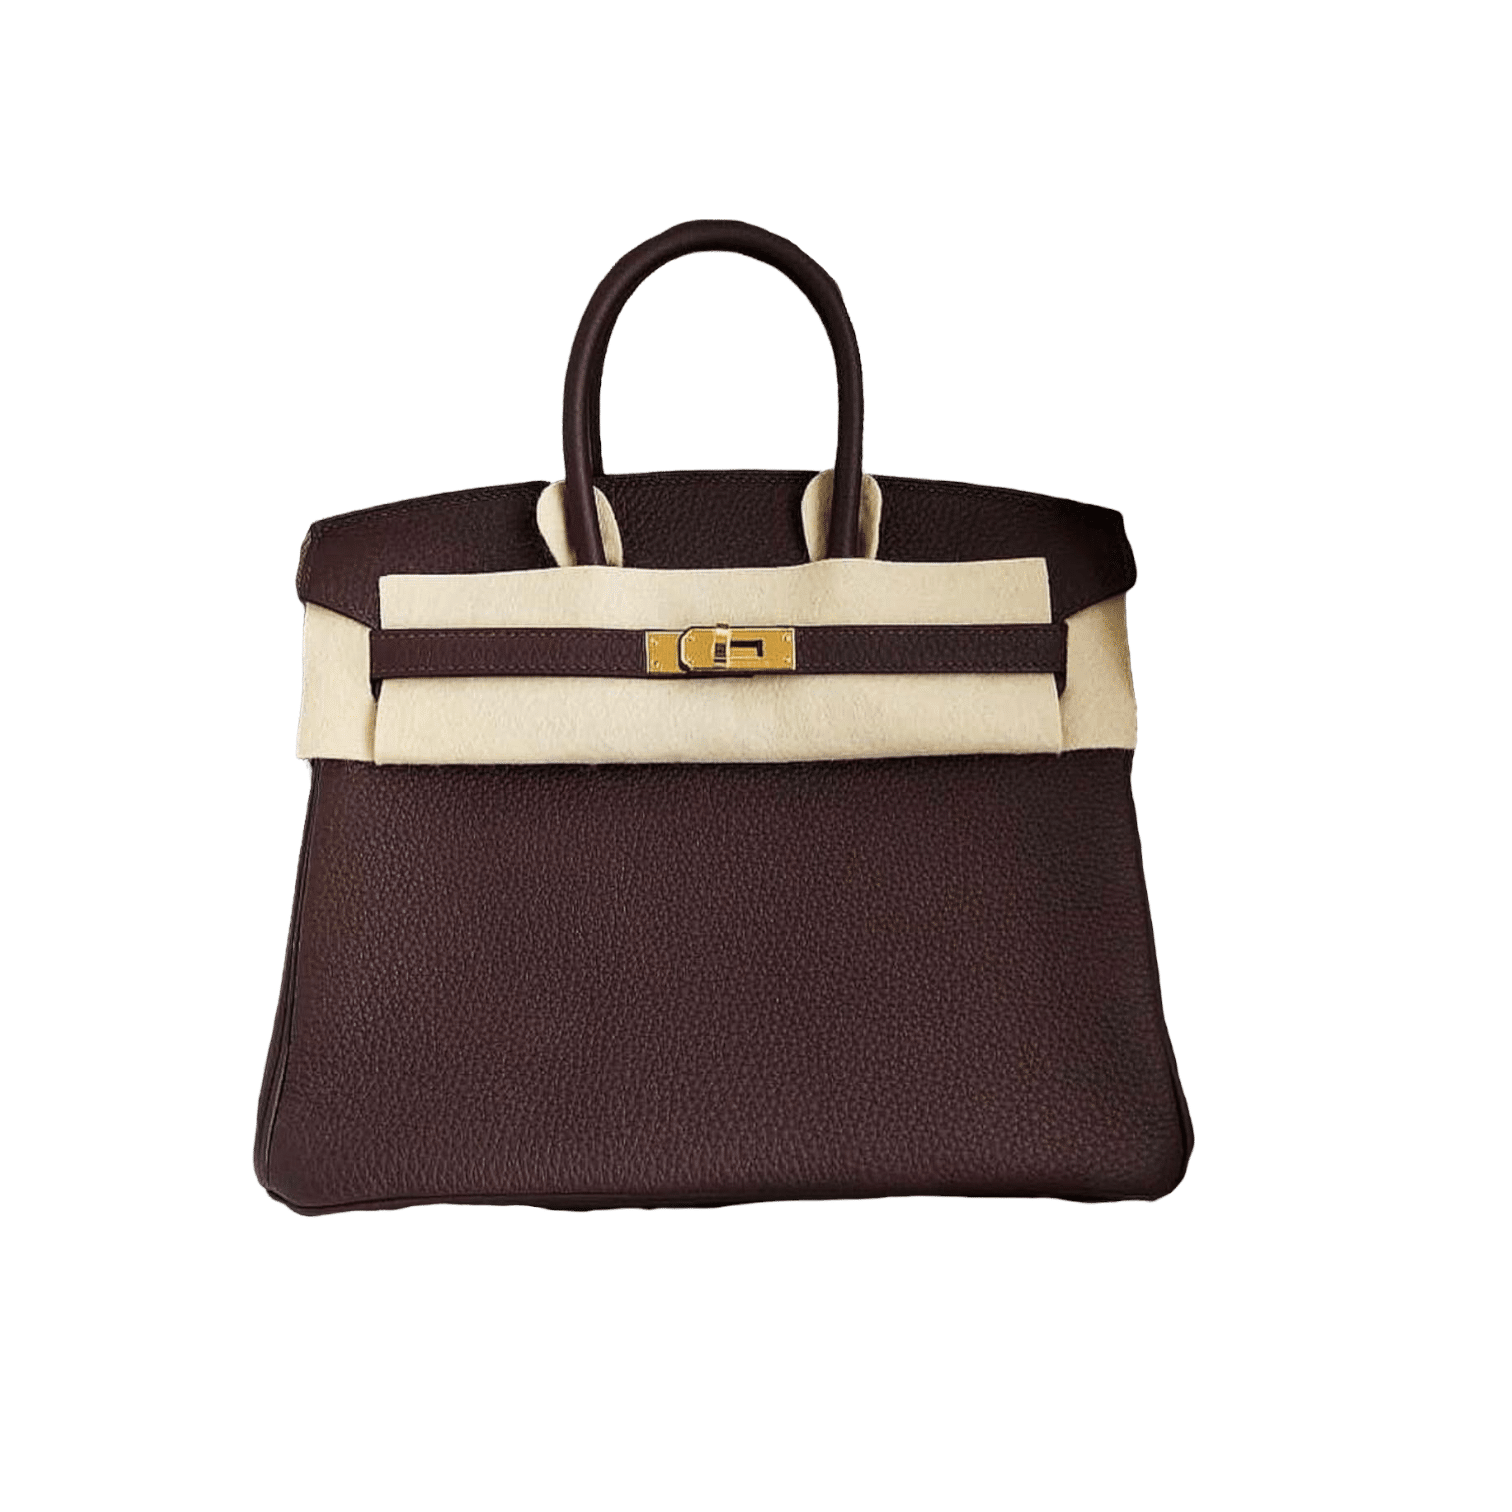 Hermes Birkin 25 in Chocolate Togo Leather and GHW – Brands Lover